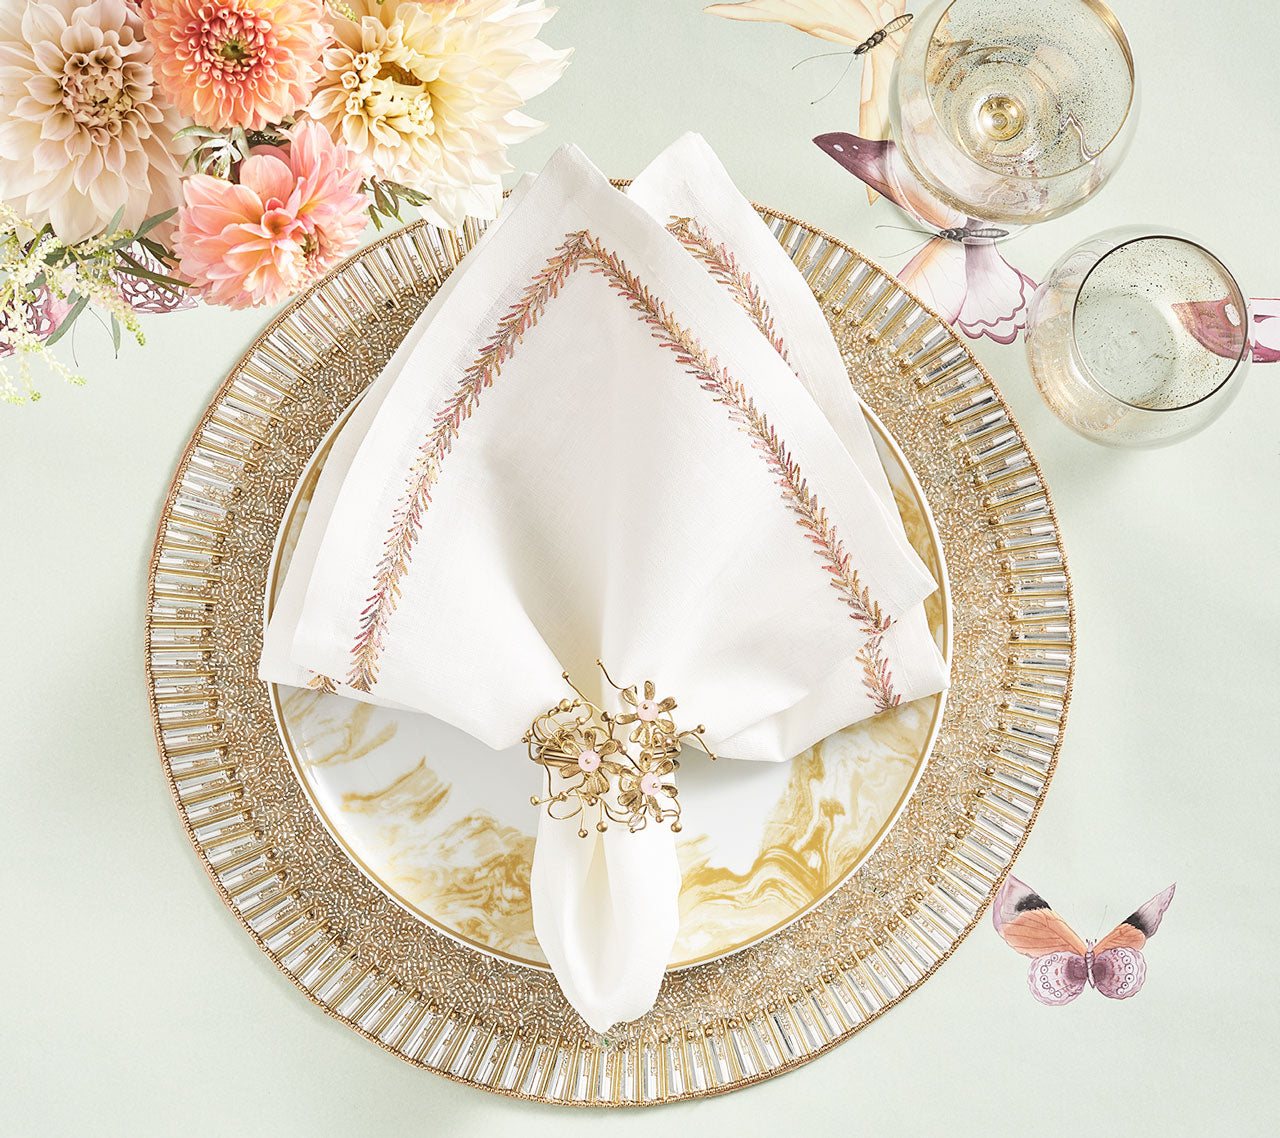 Round Bevel Placemat in gold & silver underneath similar-toned plates, napkin, and napkin ring